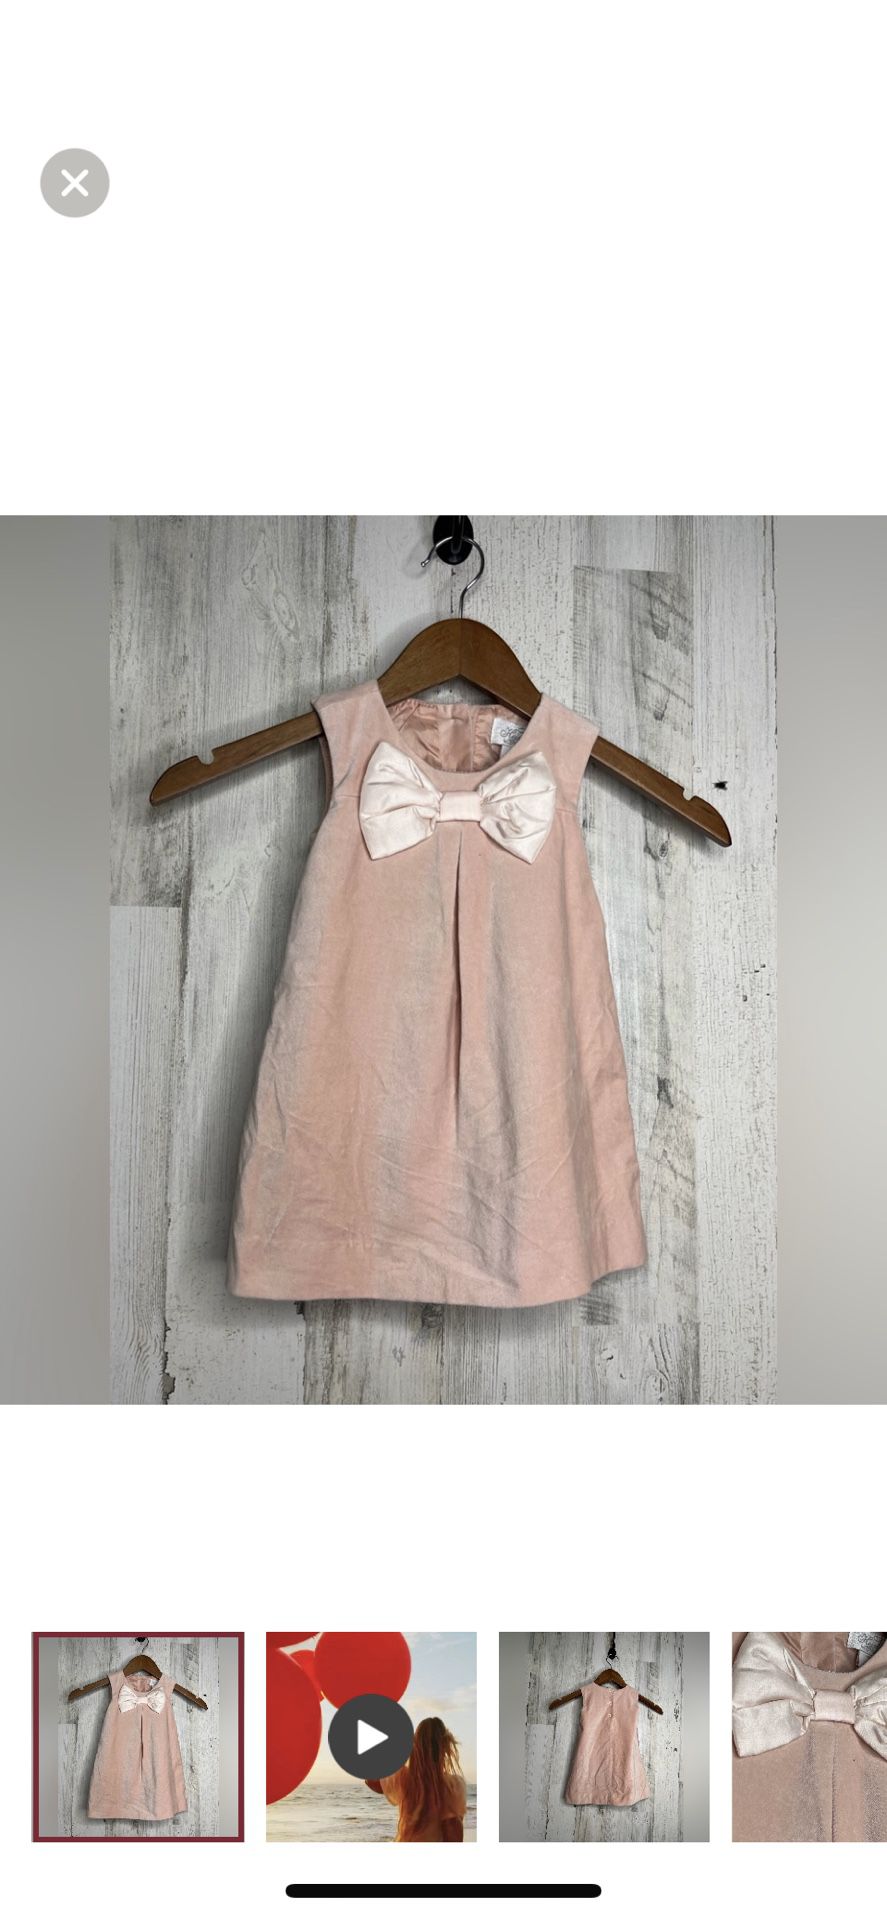 Heirlooms By Polly Finders Girls Sleeveless Velvet Bow Dress Pink Size 18M